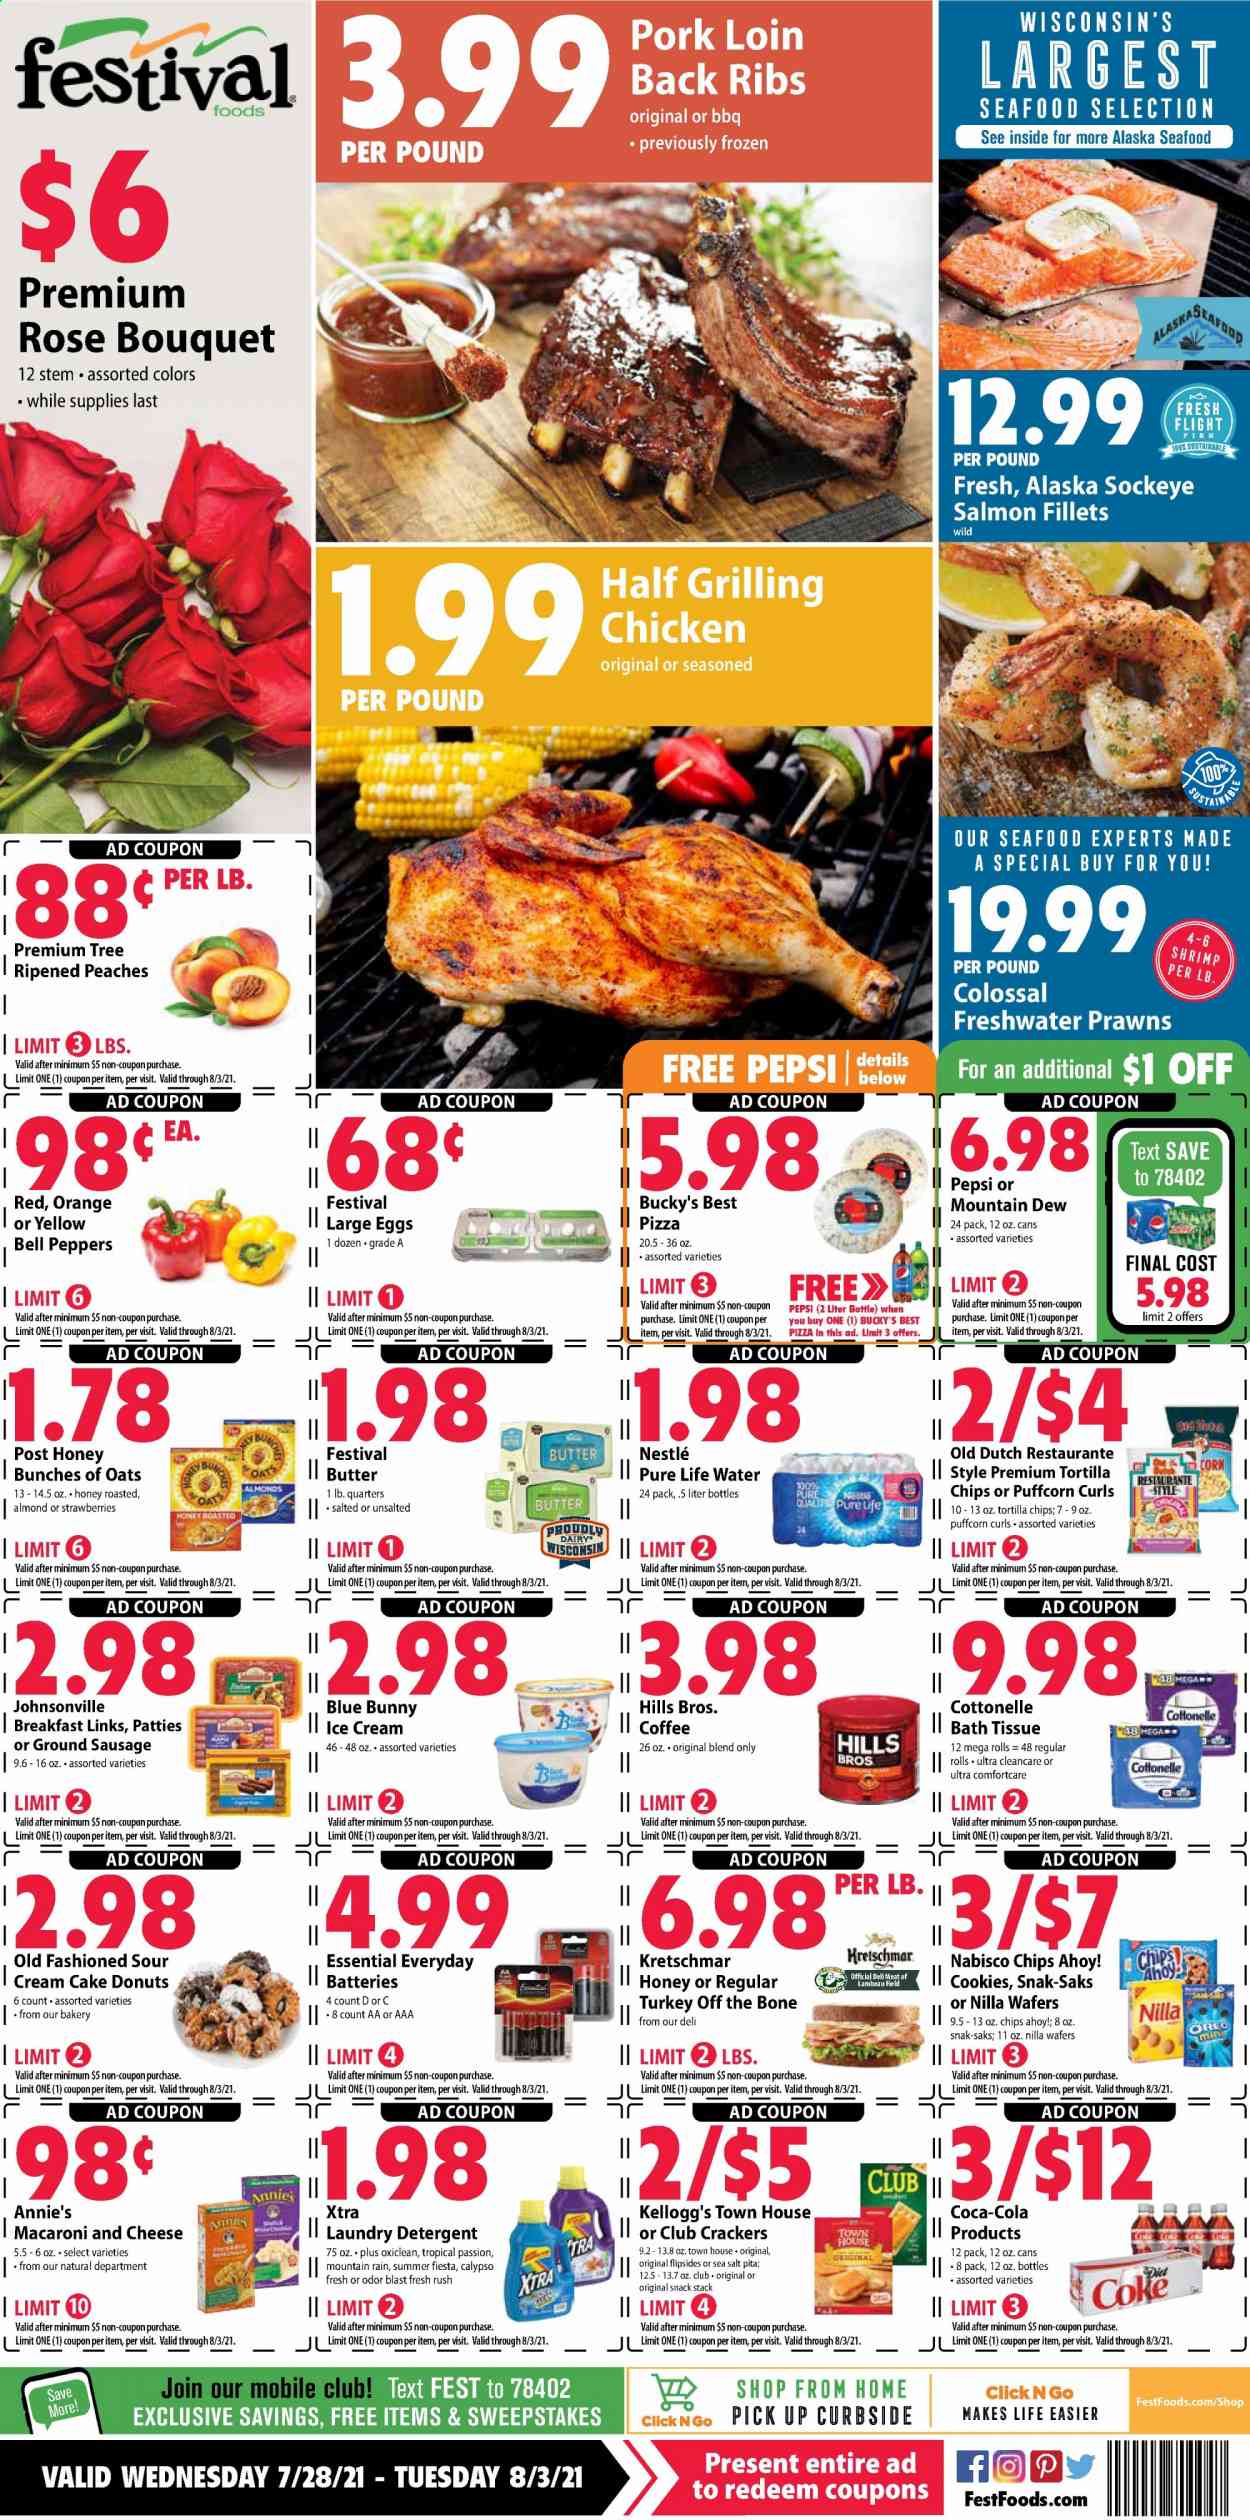 thumbnail - Festival Foods Flyer - 07/28/2021 - 08/03/2021 - Sales products - pita, cake, donut, bell peppers, corn, peppers, strawberries, oranges, salmon, salmon fillet, seafood, prawns, shrimps, macaroni & cheese, pizza, Annie's, Johnsonville, sausage, Oreo, large eggs, butter, ice cream, Blue Bunny, cookies, Nestlé, wafers, snack, crackers, Kellogg's, Chips Ahoy!, tortilla chips, Coca-Cola, Mountain Dew, Pepsi, Pure Life Water, coffee, wine, rosé wine, pork loin, pork meat, bath tissue, Cottonelle, detergent, OxiClean, laundry detergent, XTRA, peaches. Page 1.